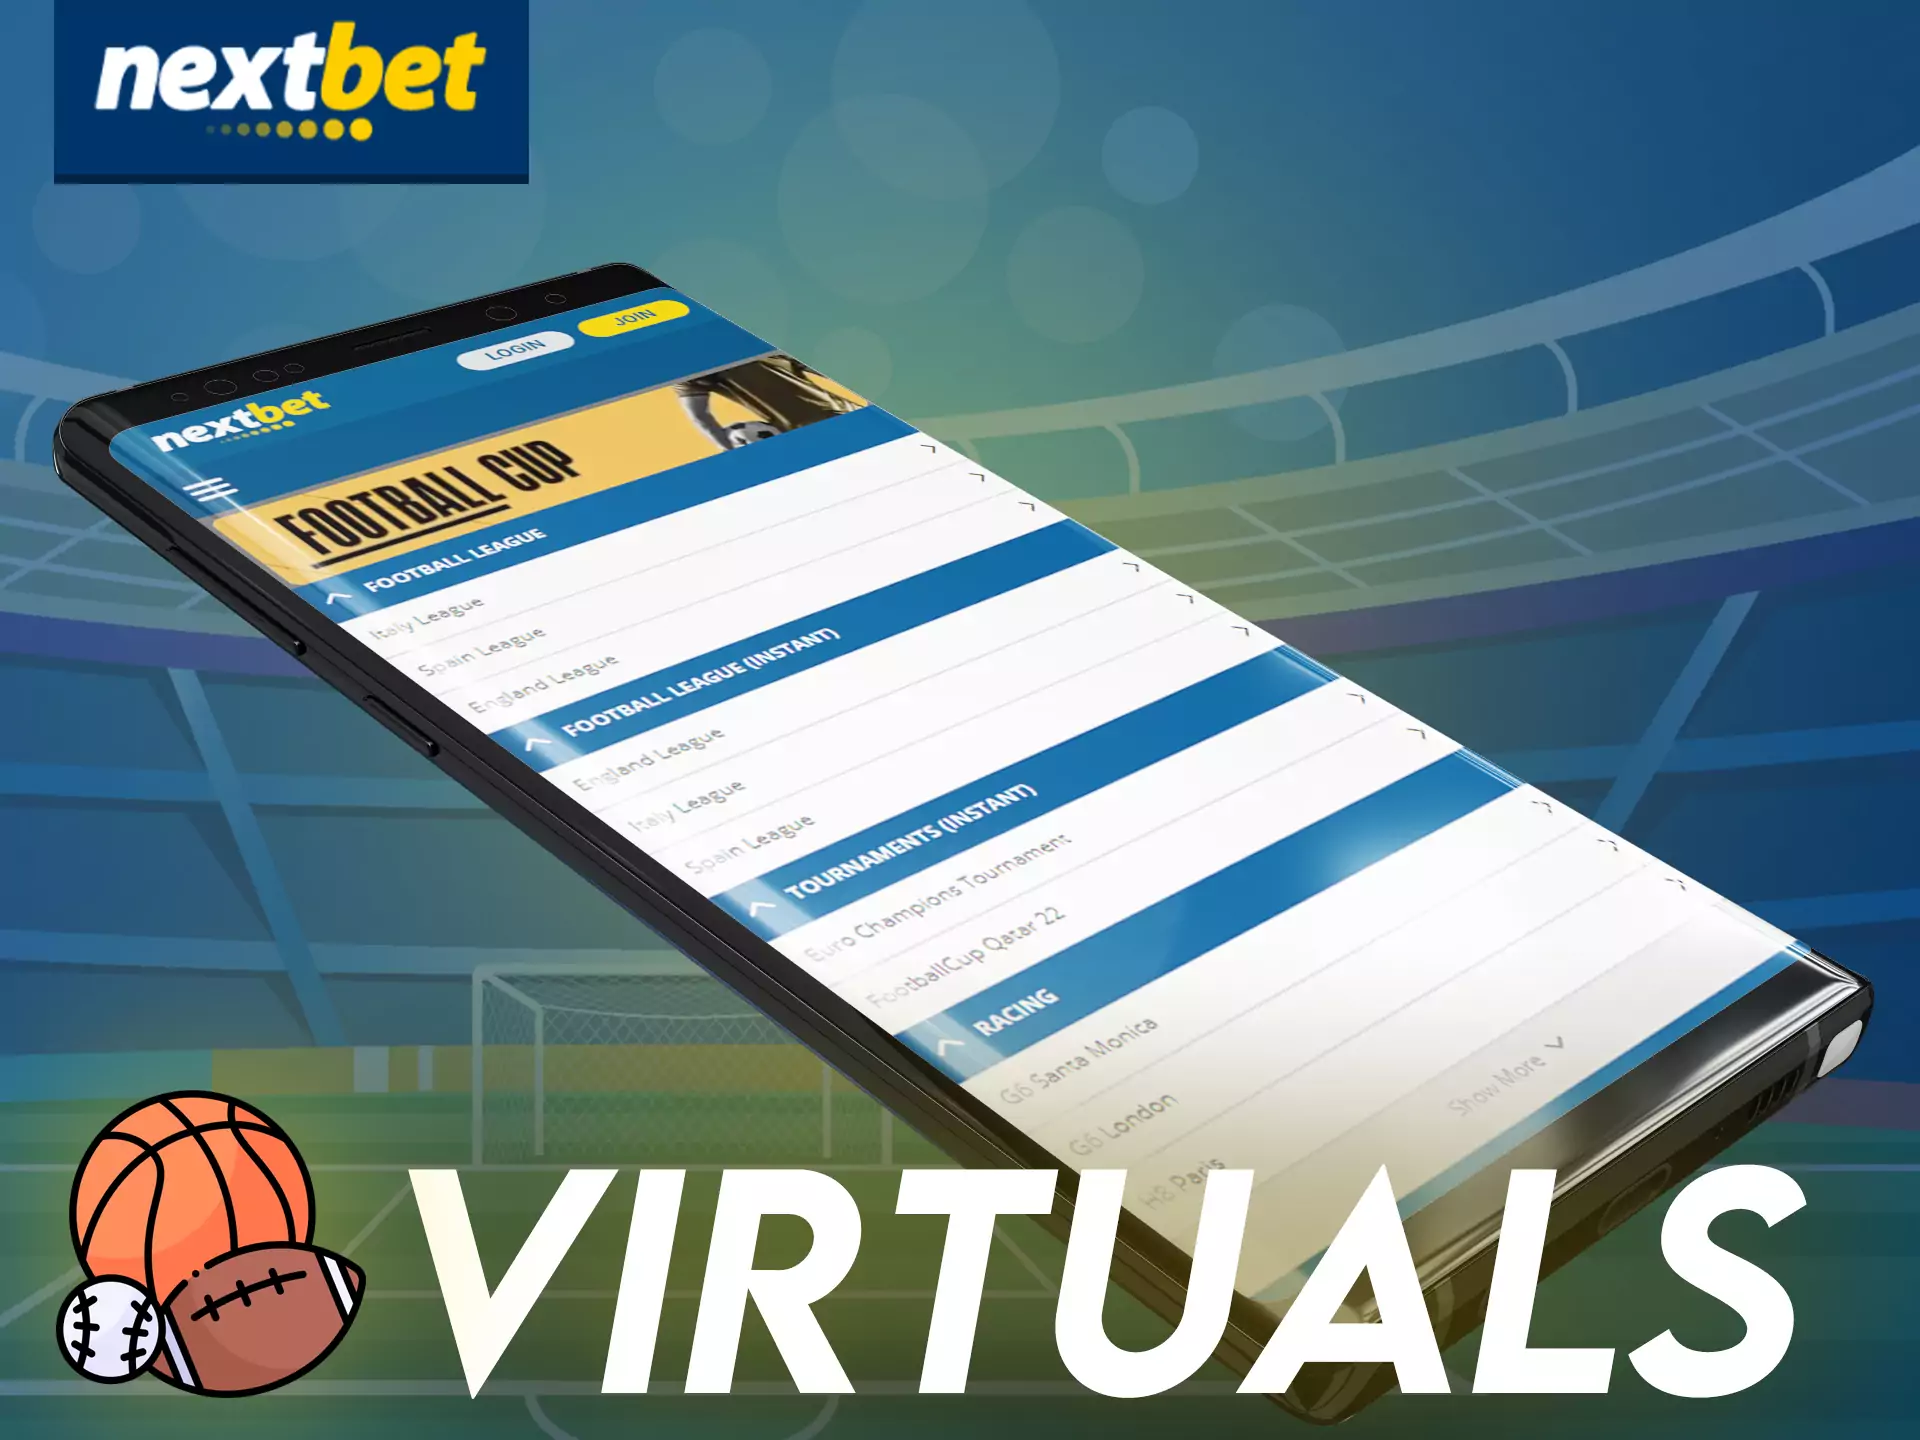 You can place bets on virtual sports in the Nextbet app.